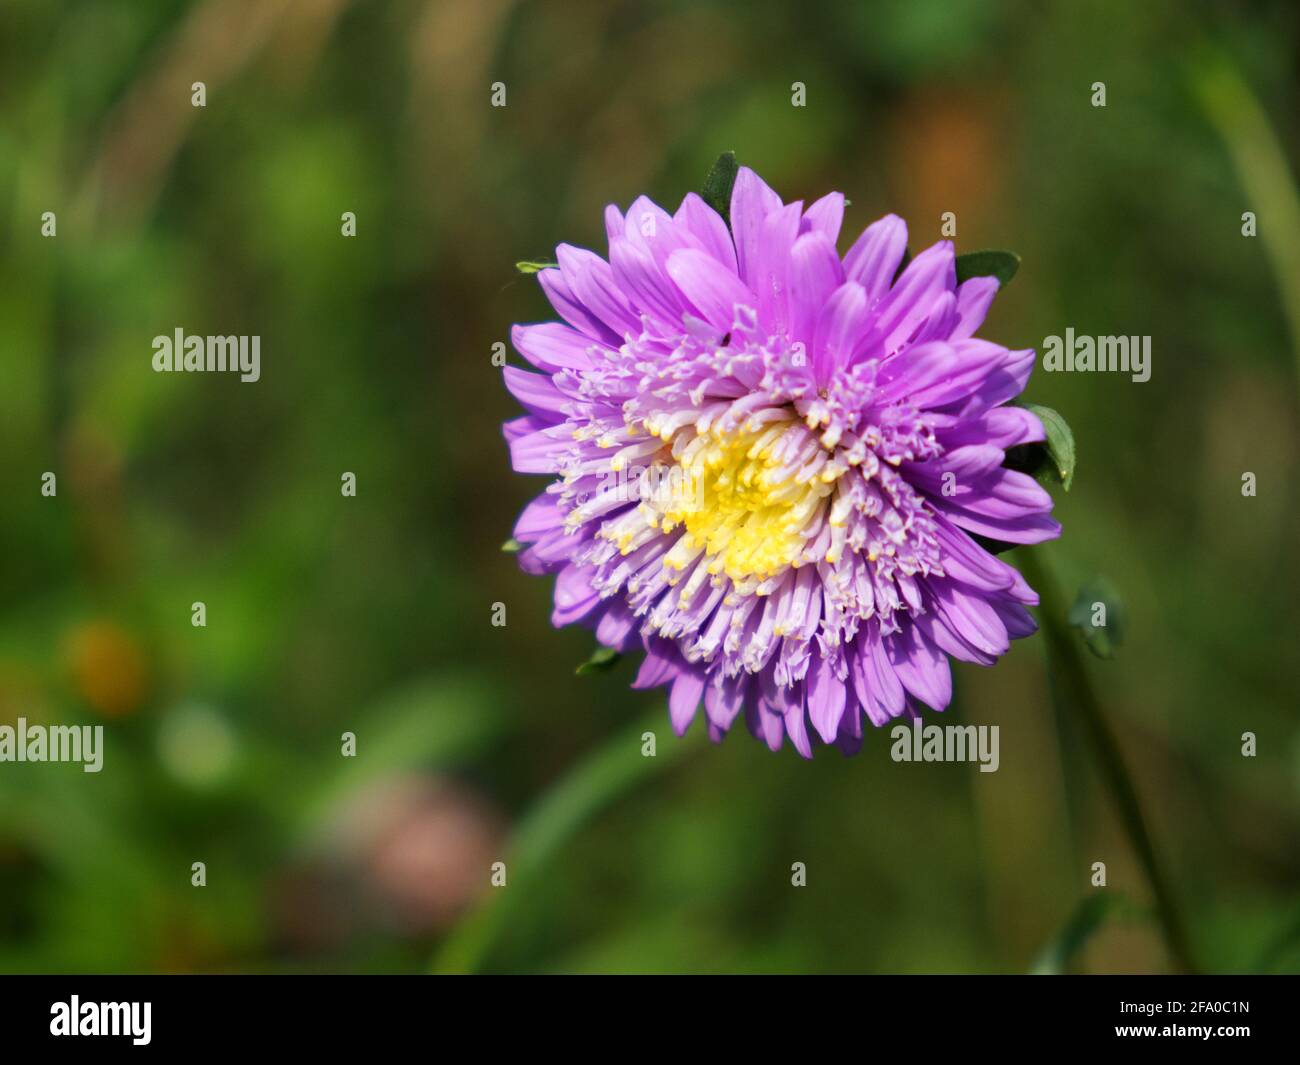 Single flower of purple chrysanthemum on a blurred background, close-up. Dew drops on flower petals. Stock Photo